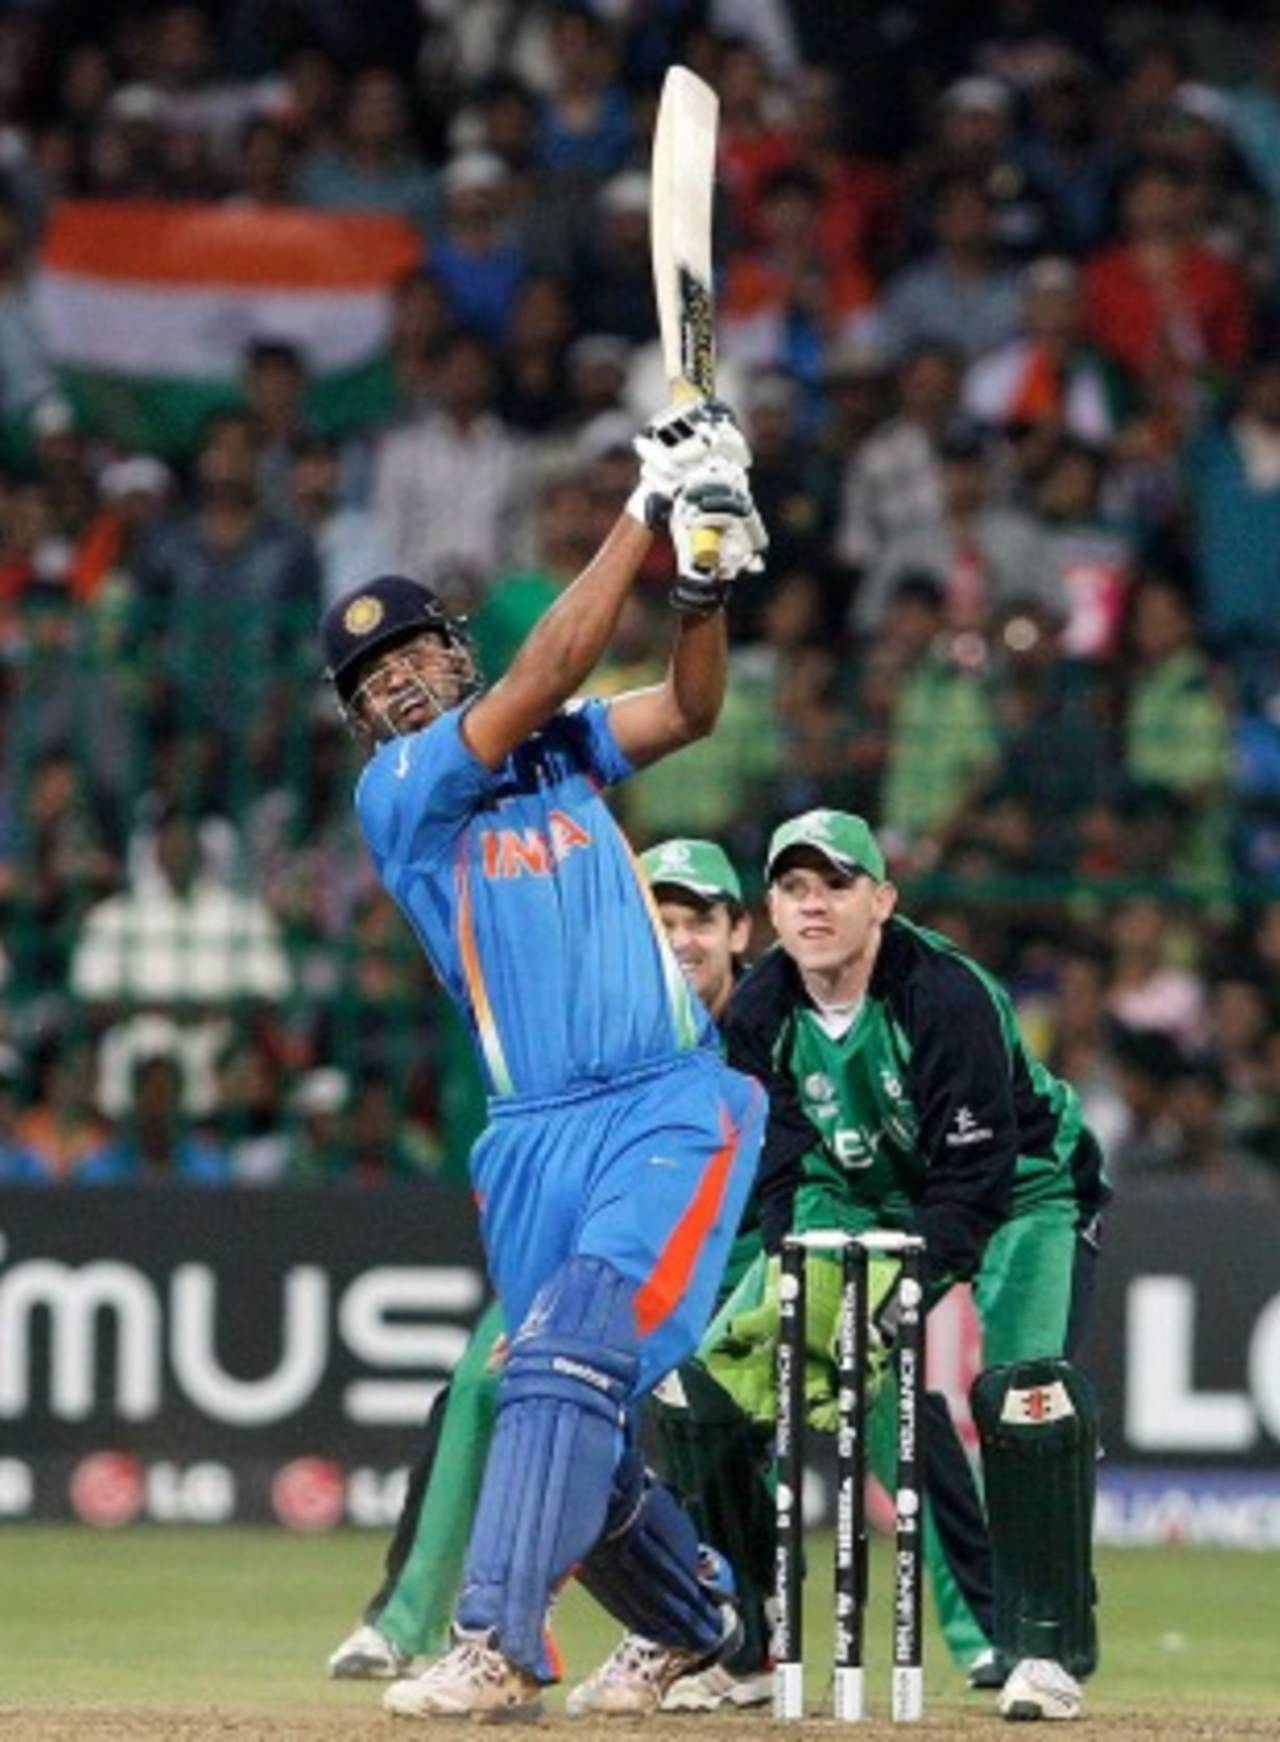 Yusuf Pathan sends one out of Bangalore, India v Ireland, Group B, World Cup 2011, Bangalore, March 6, 2011